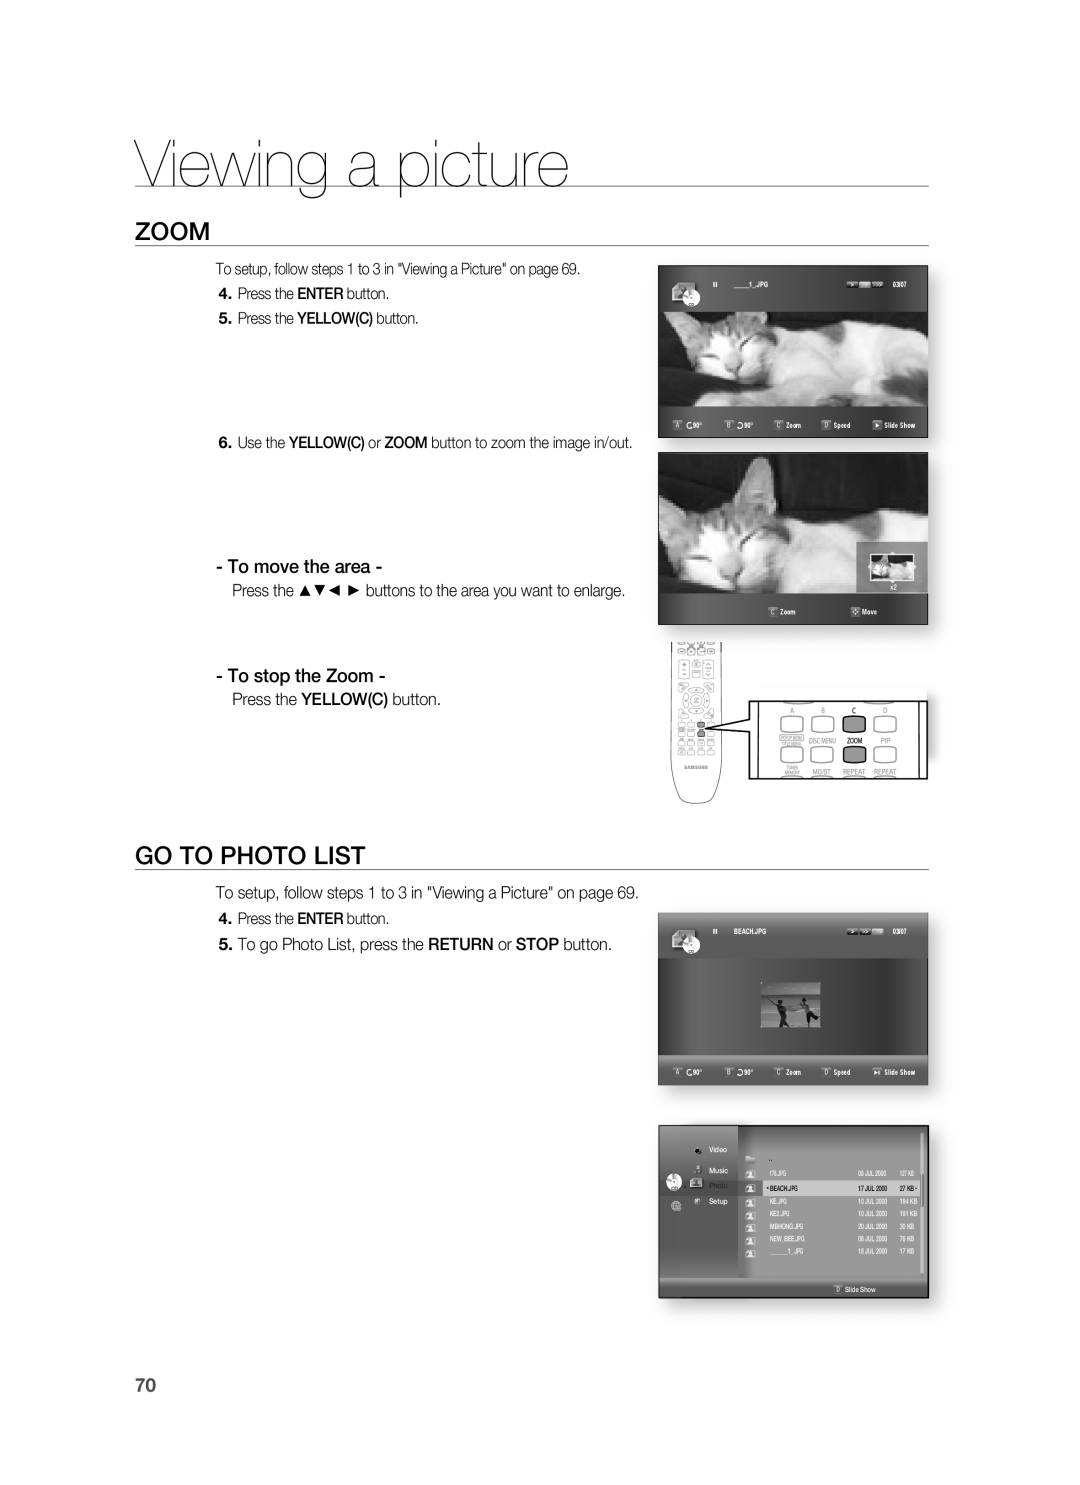 Samsung HT-BD8200 user manual Go To Photo List, Viewing a picture, To move the area, To stop the Zoom 